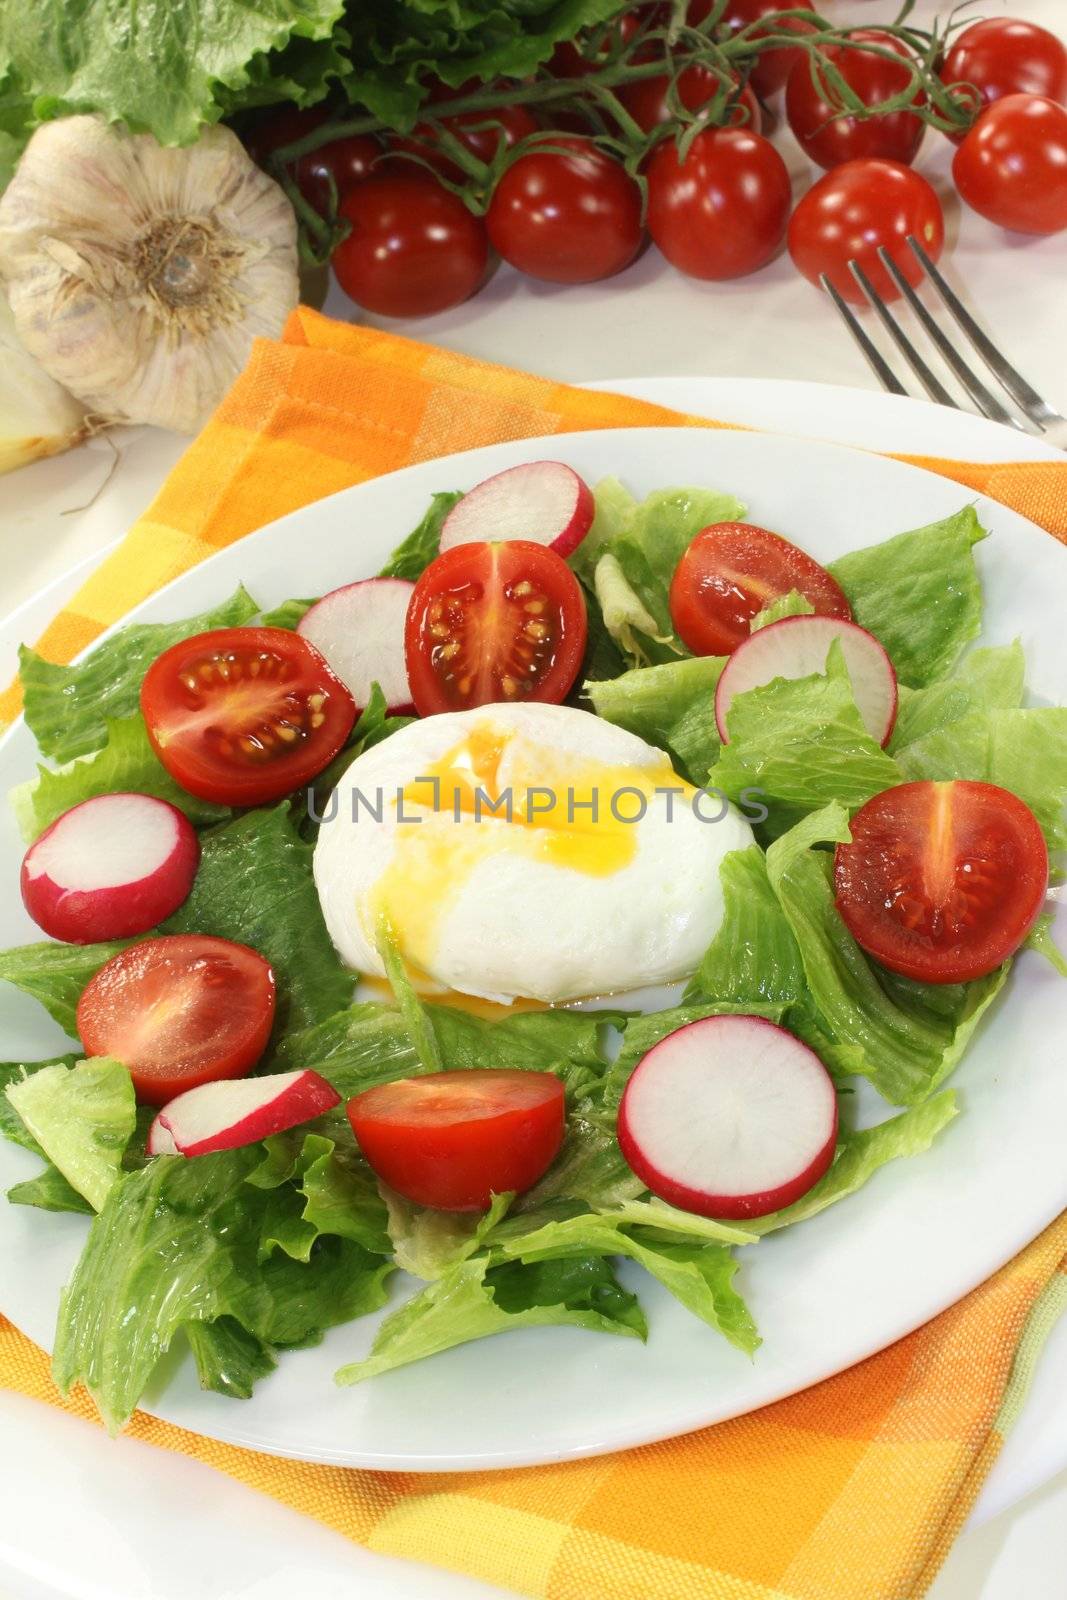 poached egg by silencefoto